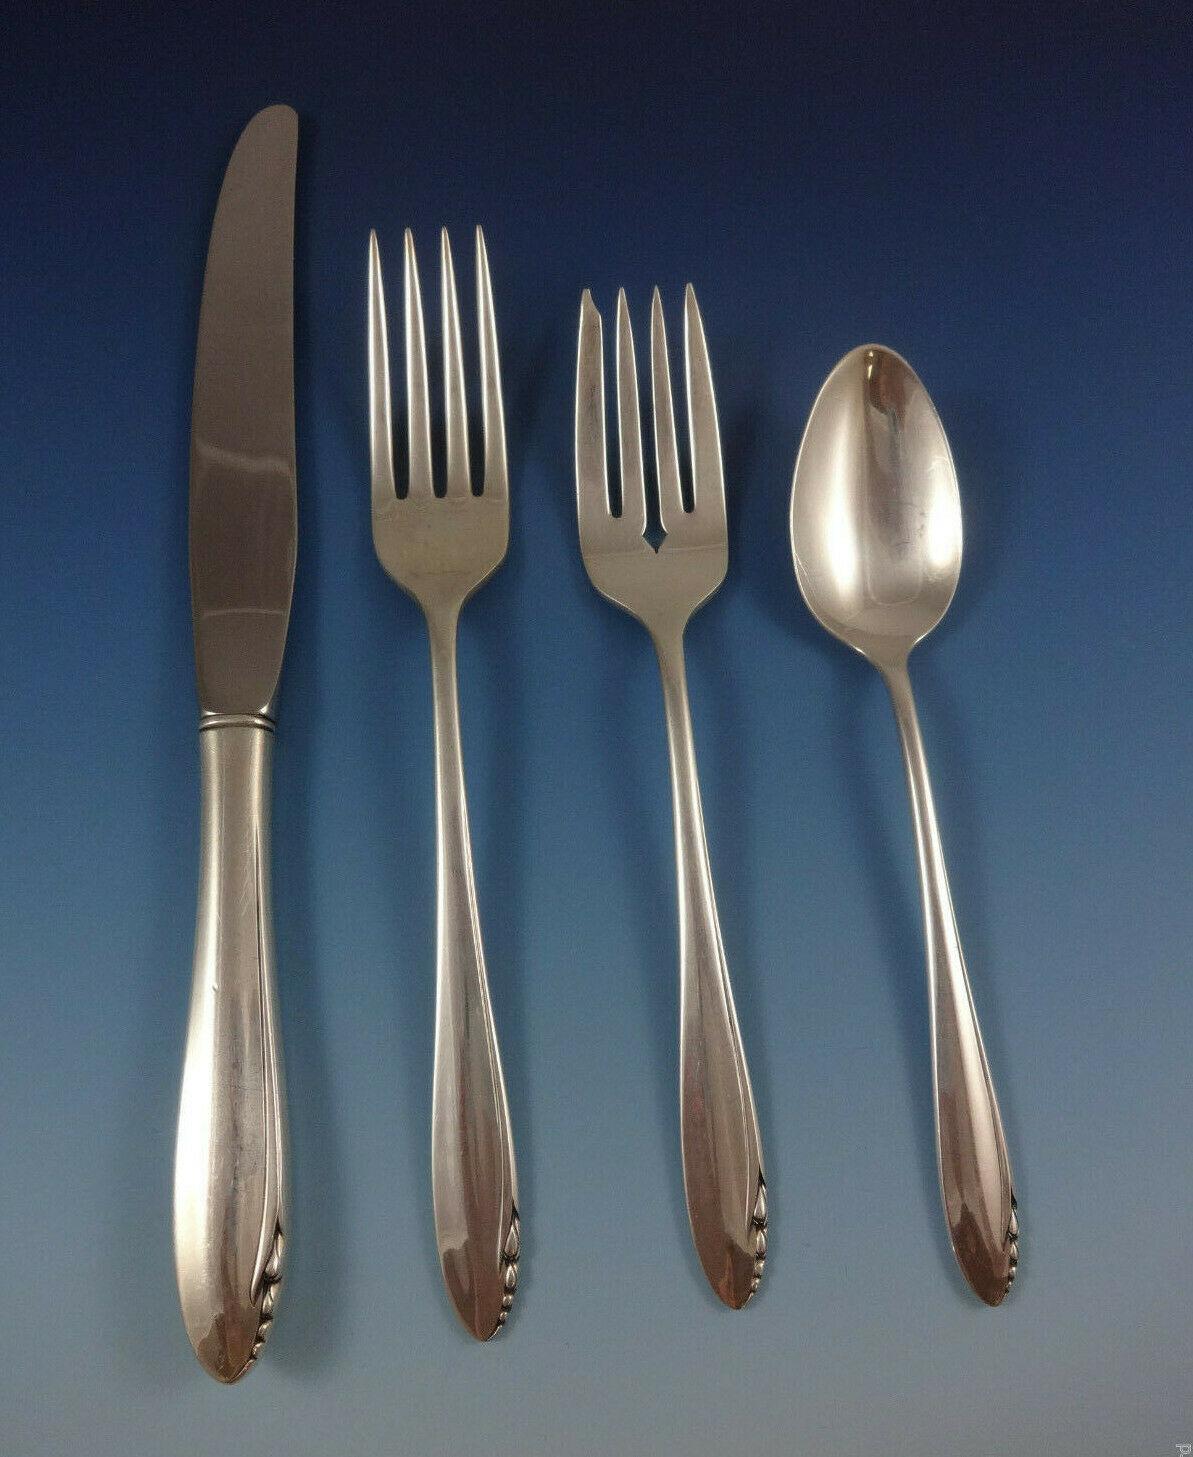 Lasting Spring by Oneida sterling silver flatware set - 59 pieces. This pattern has a simple, Mid-century Modern design. This set includes:

12 knives, 8 7/8